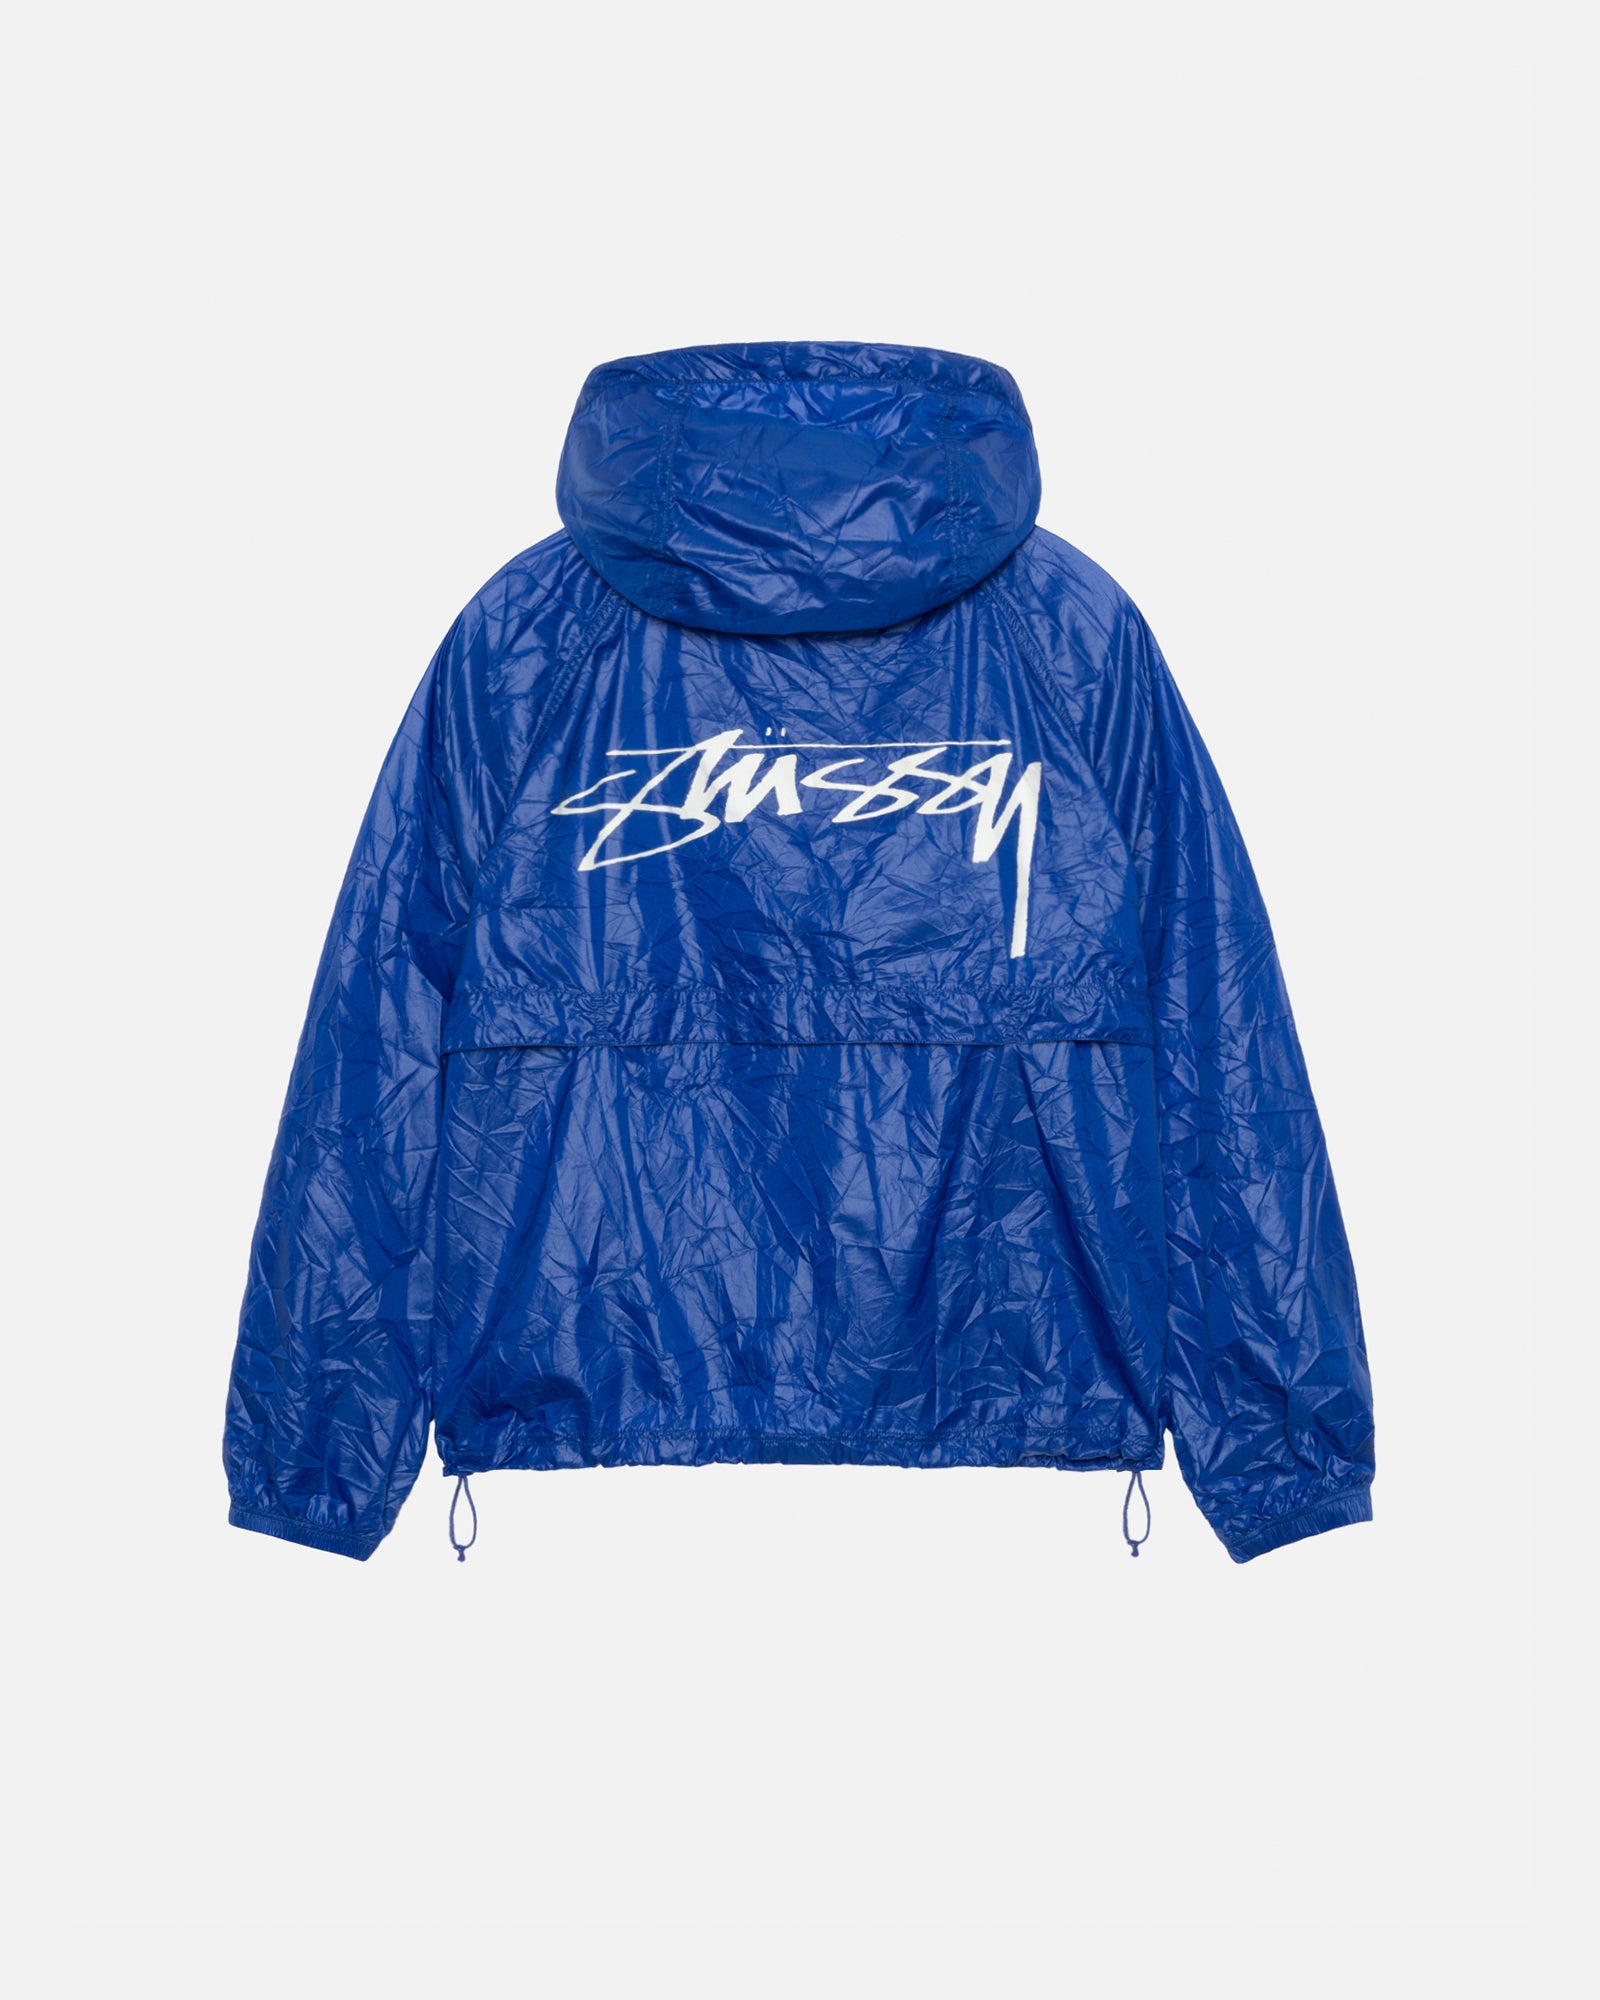 SHOP ALL** DO NOT DELETE / USED FOR SWATCHES – Stüssy